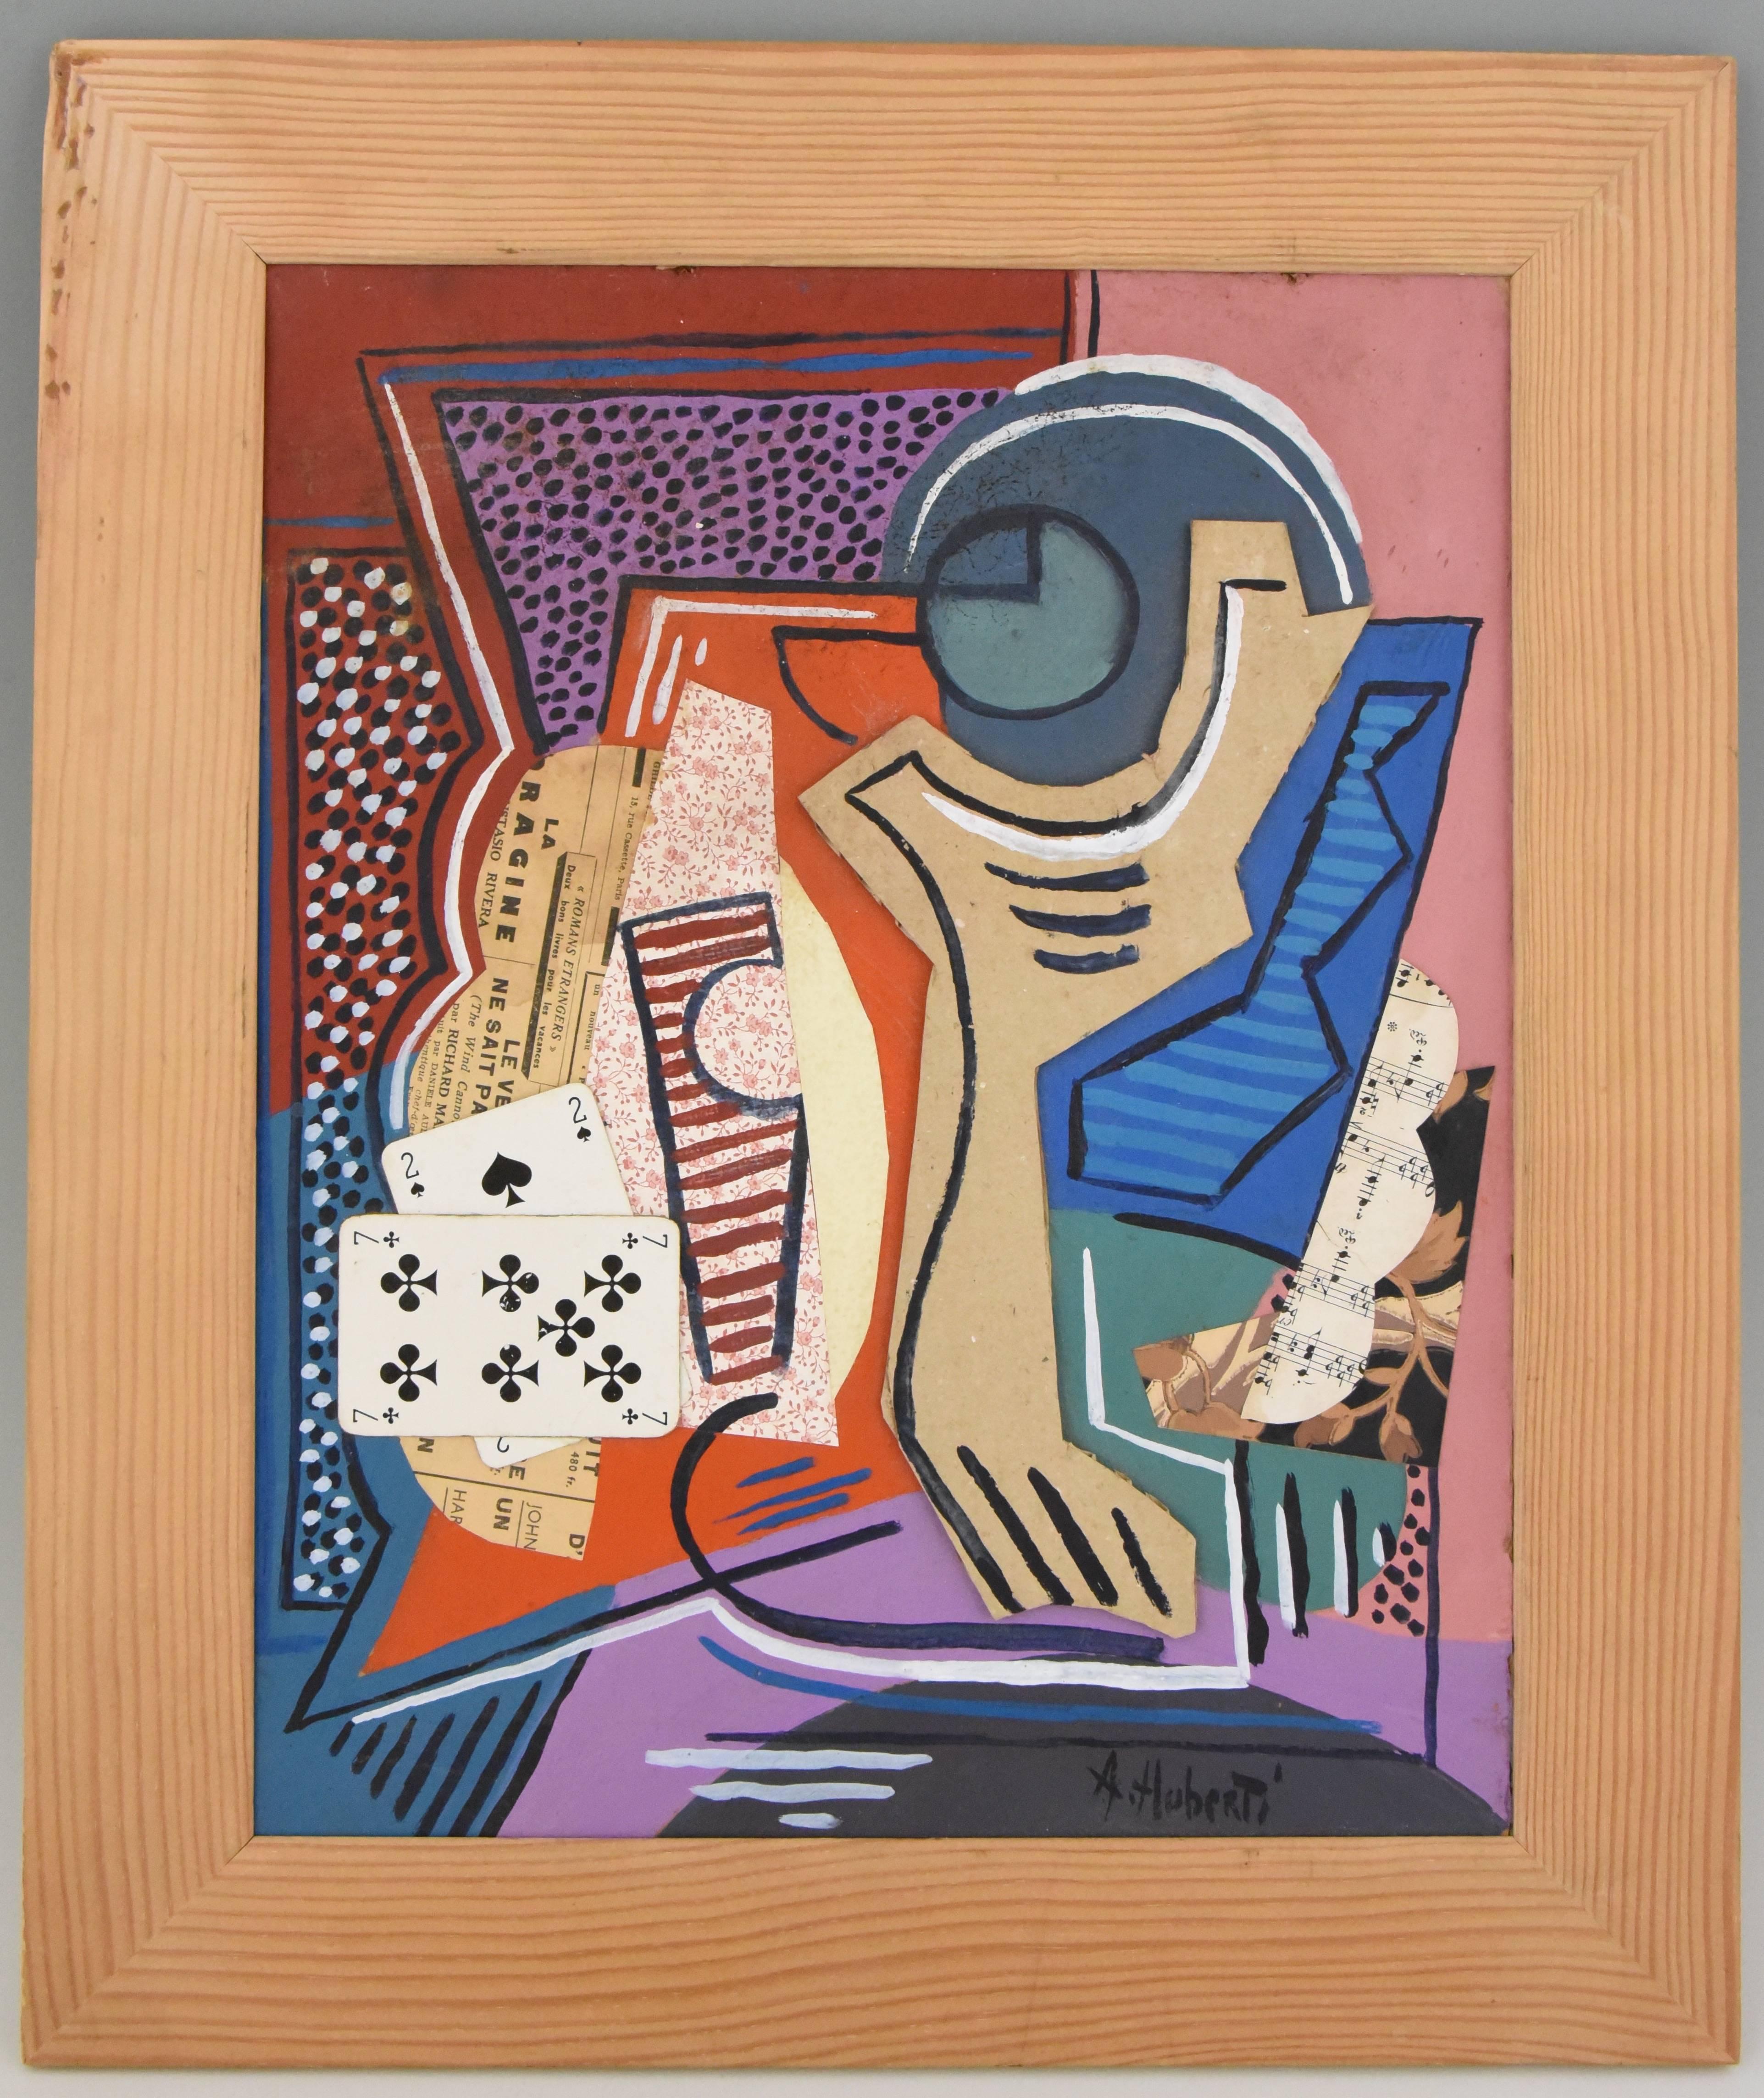 Description: Cards, cubist collage with playing cards and staff paper.
Artist/ maker: Antonio Huberti. Born in Spain in 1907, worked in France.
Signature/ marks: A. Huberti.
Date: 1940-1950
Material: Mixed-media on cardboard. Framed.
Origin: